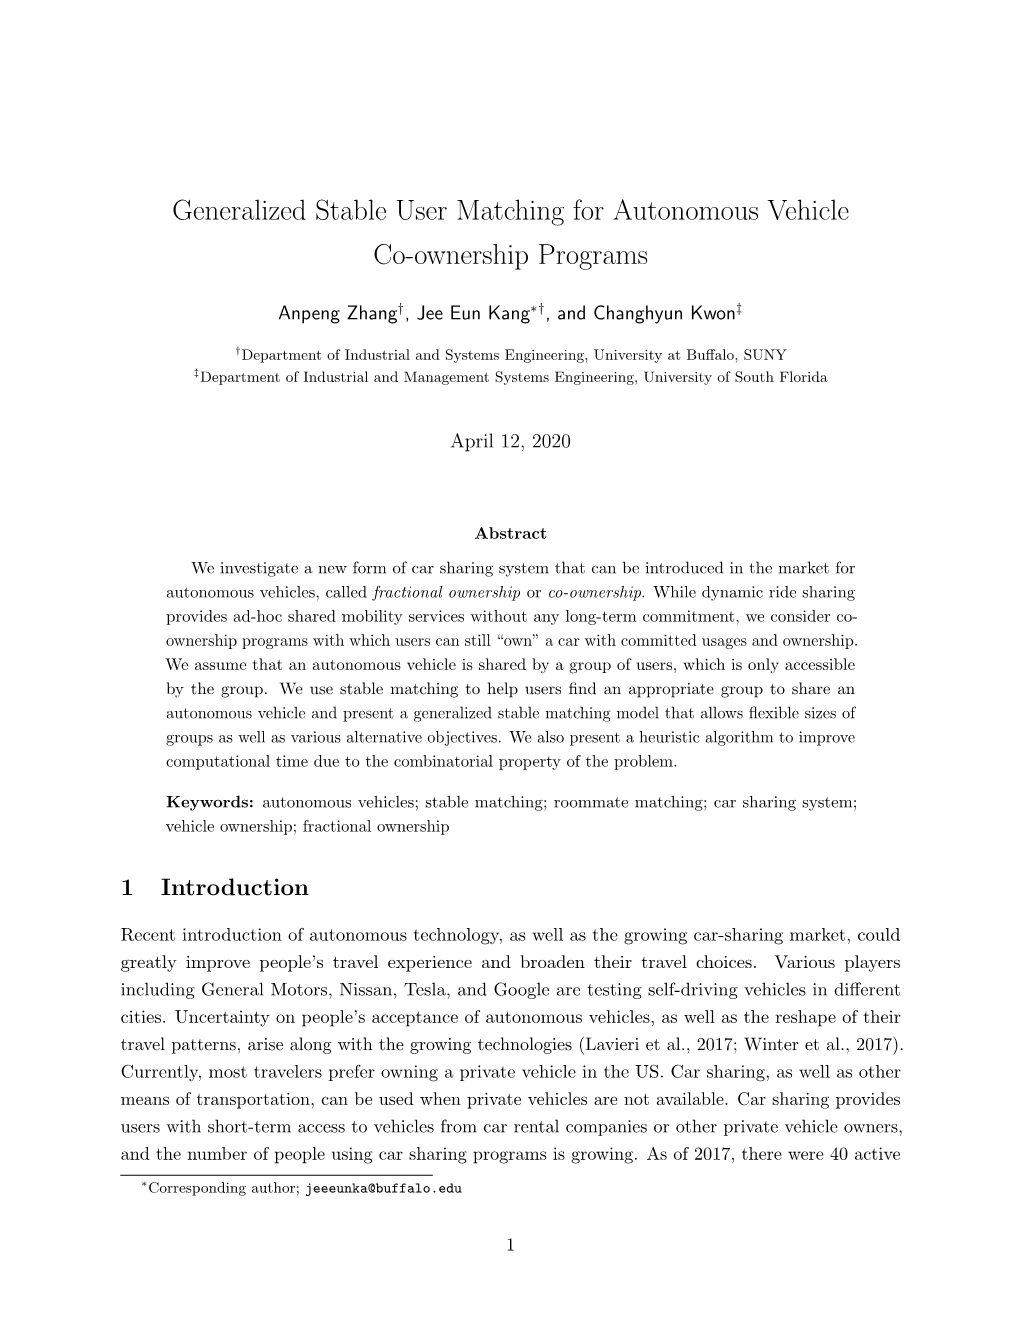 Generalized Stable User Matching for Autonomous Vehicle Co-Ownership Programs